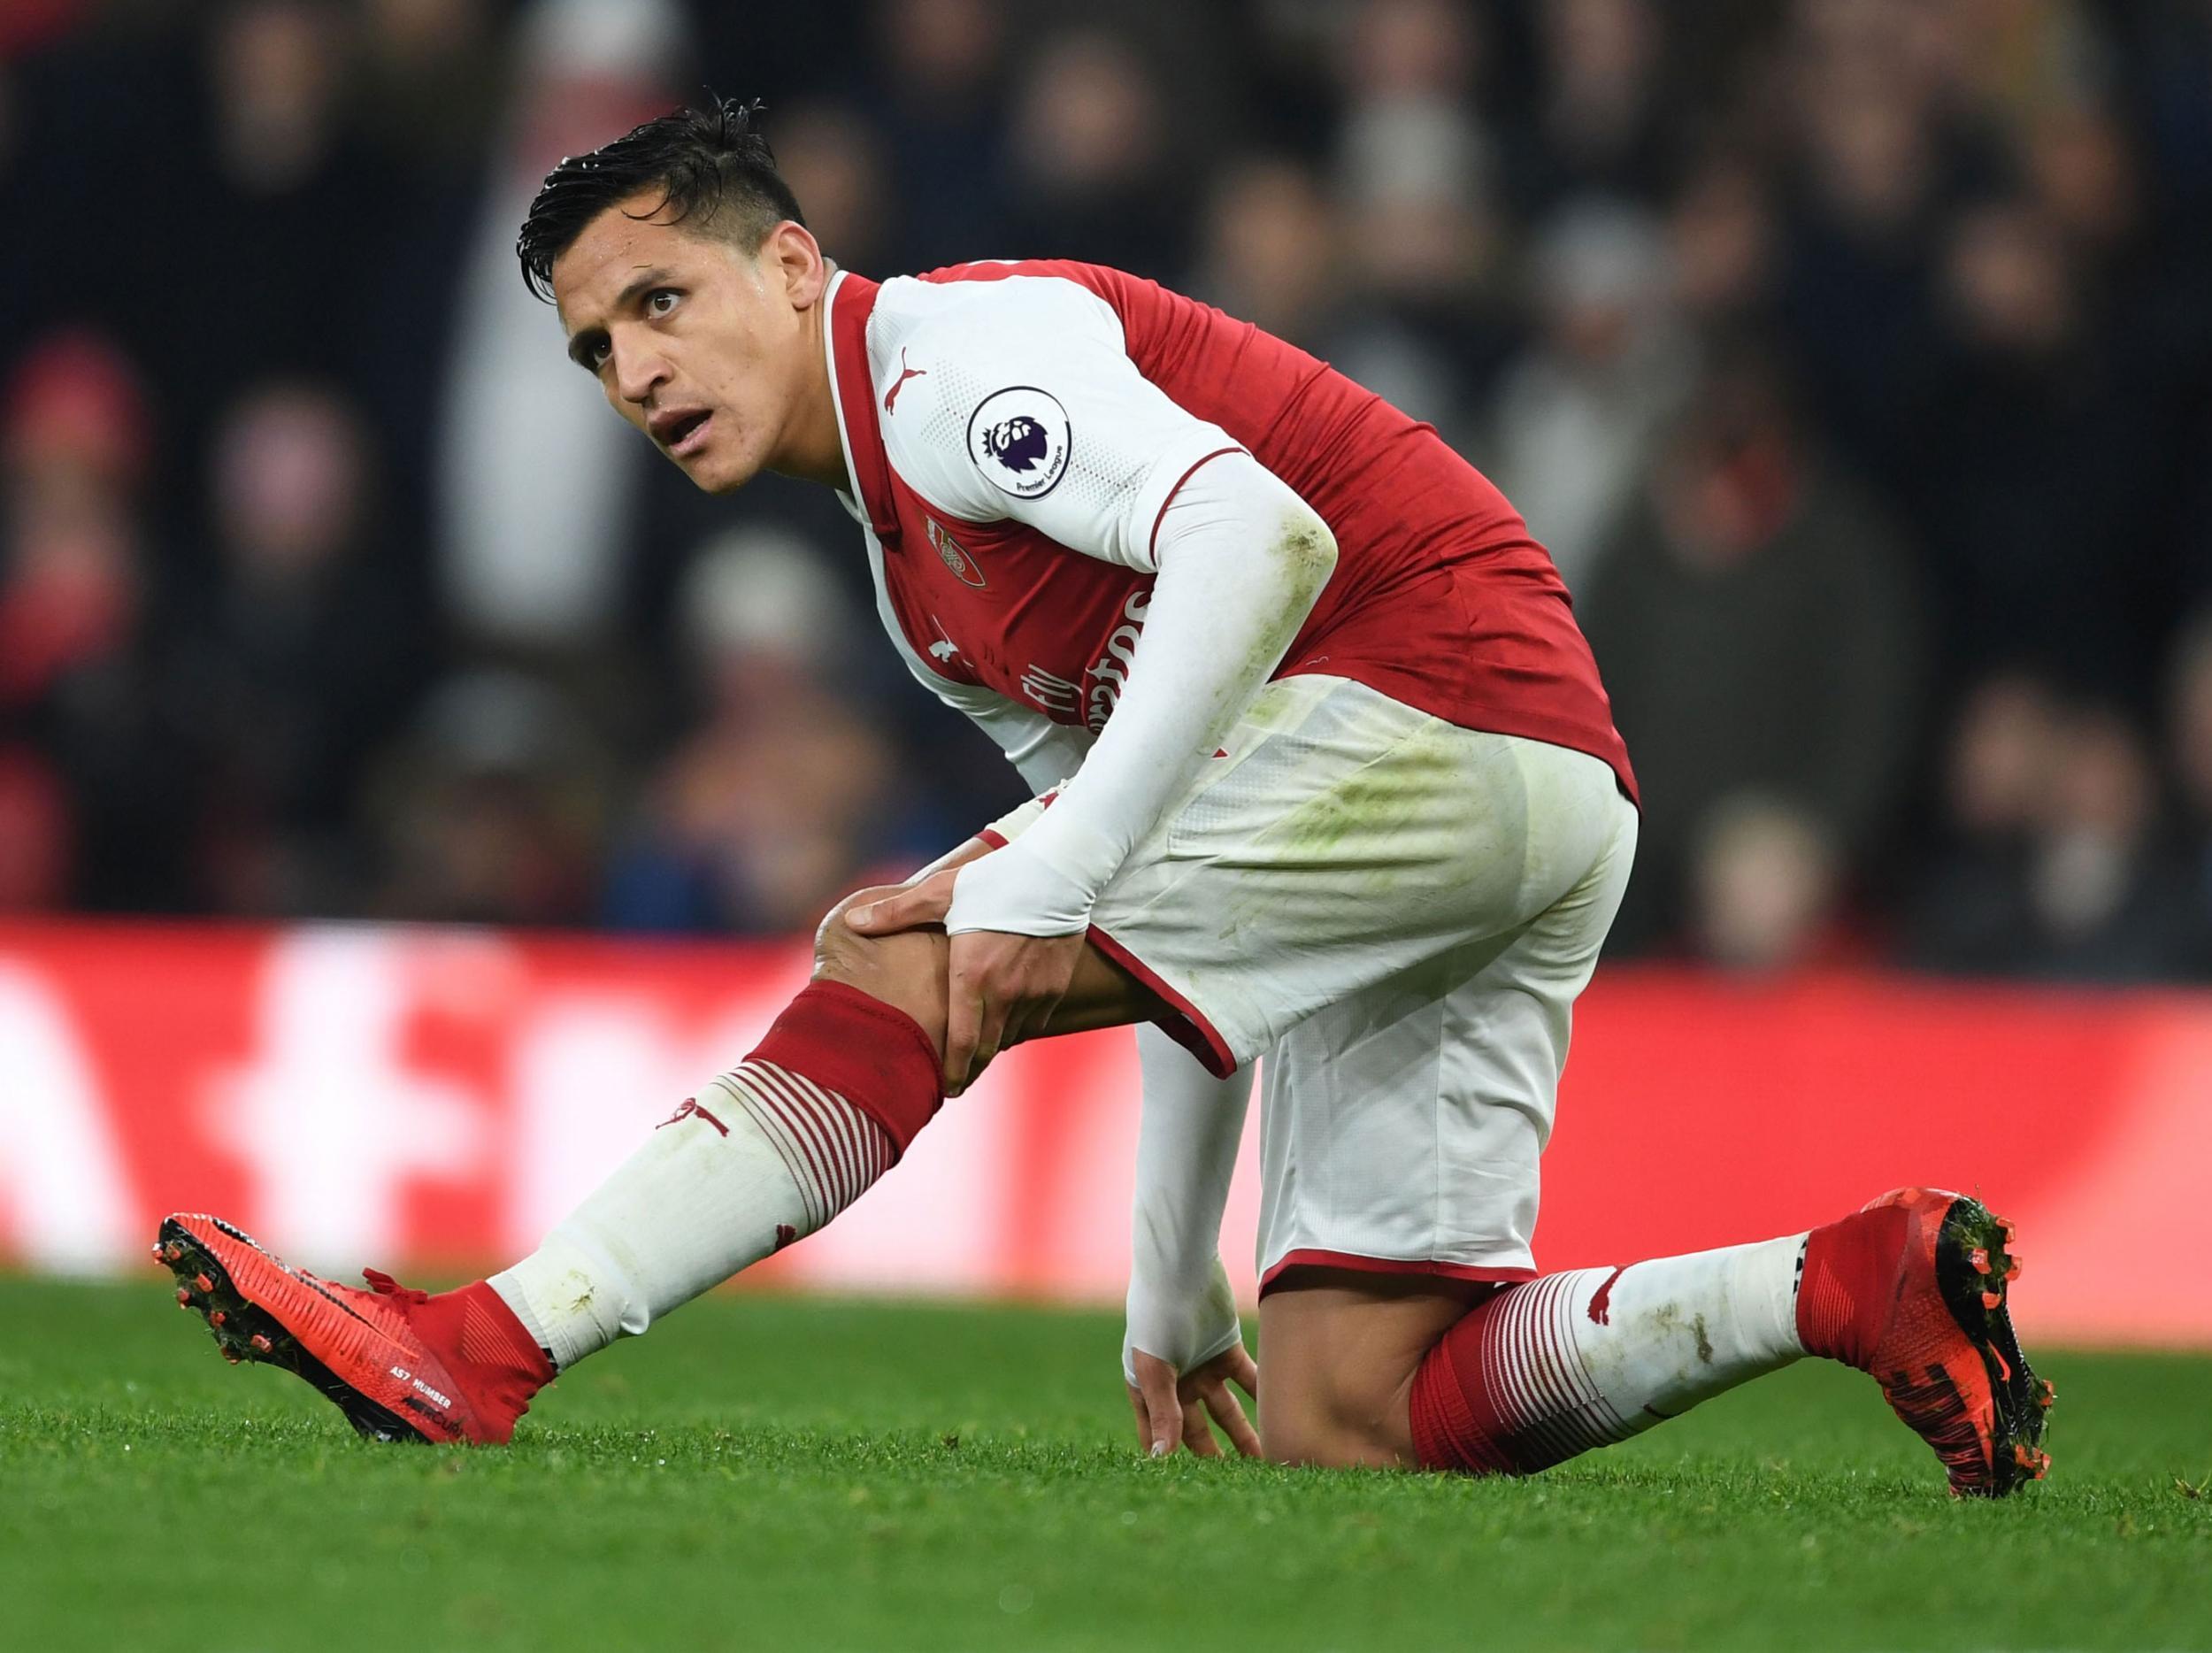 Manchester City are set to test Arsenal's resolve over Alexis Sanchez once again in January